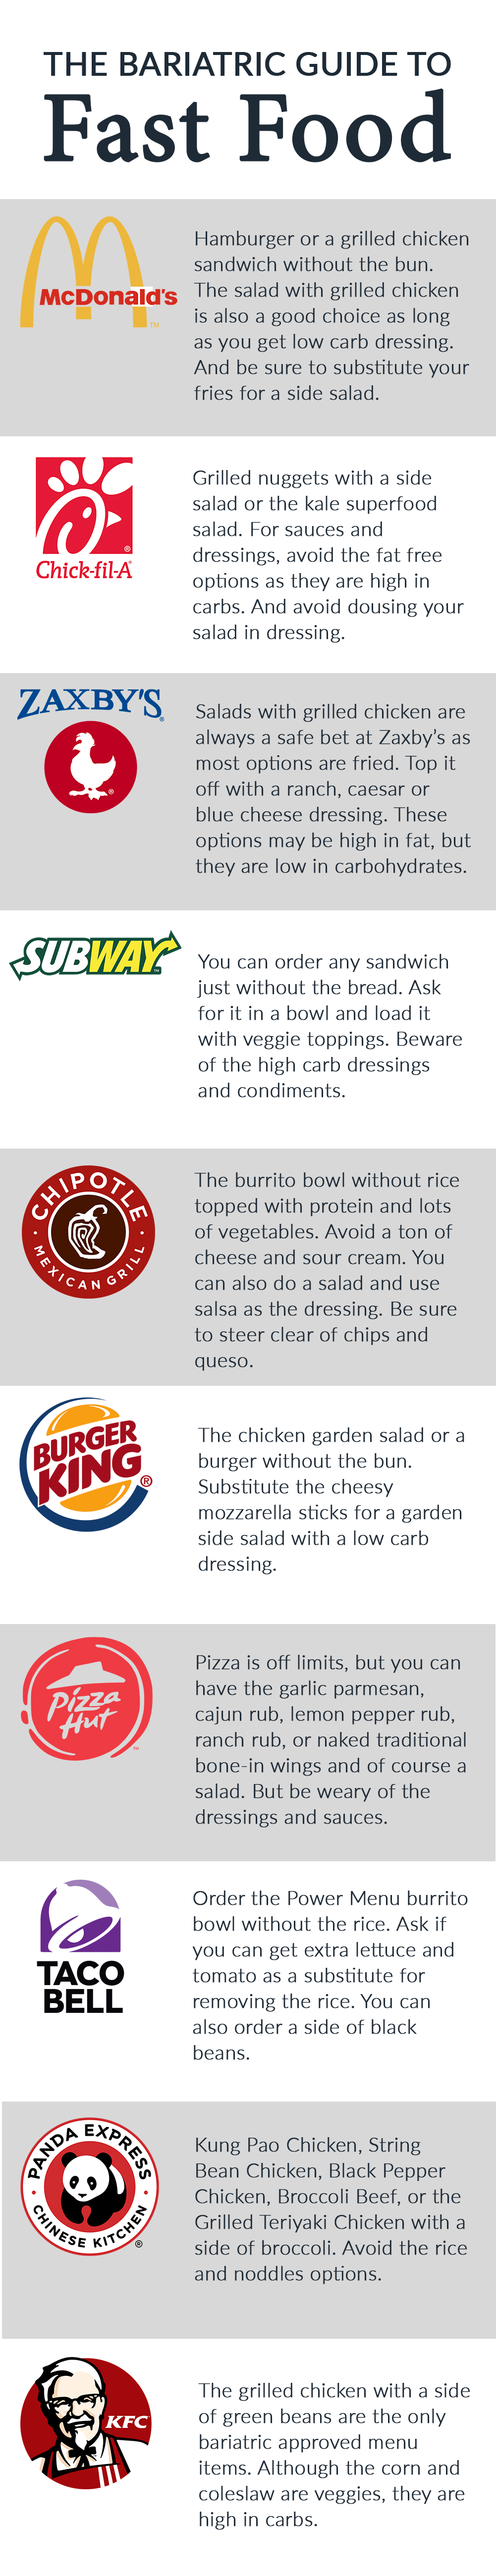 Bariatric Patient Guide to Fast Food